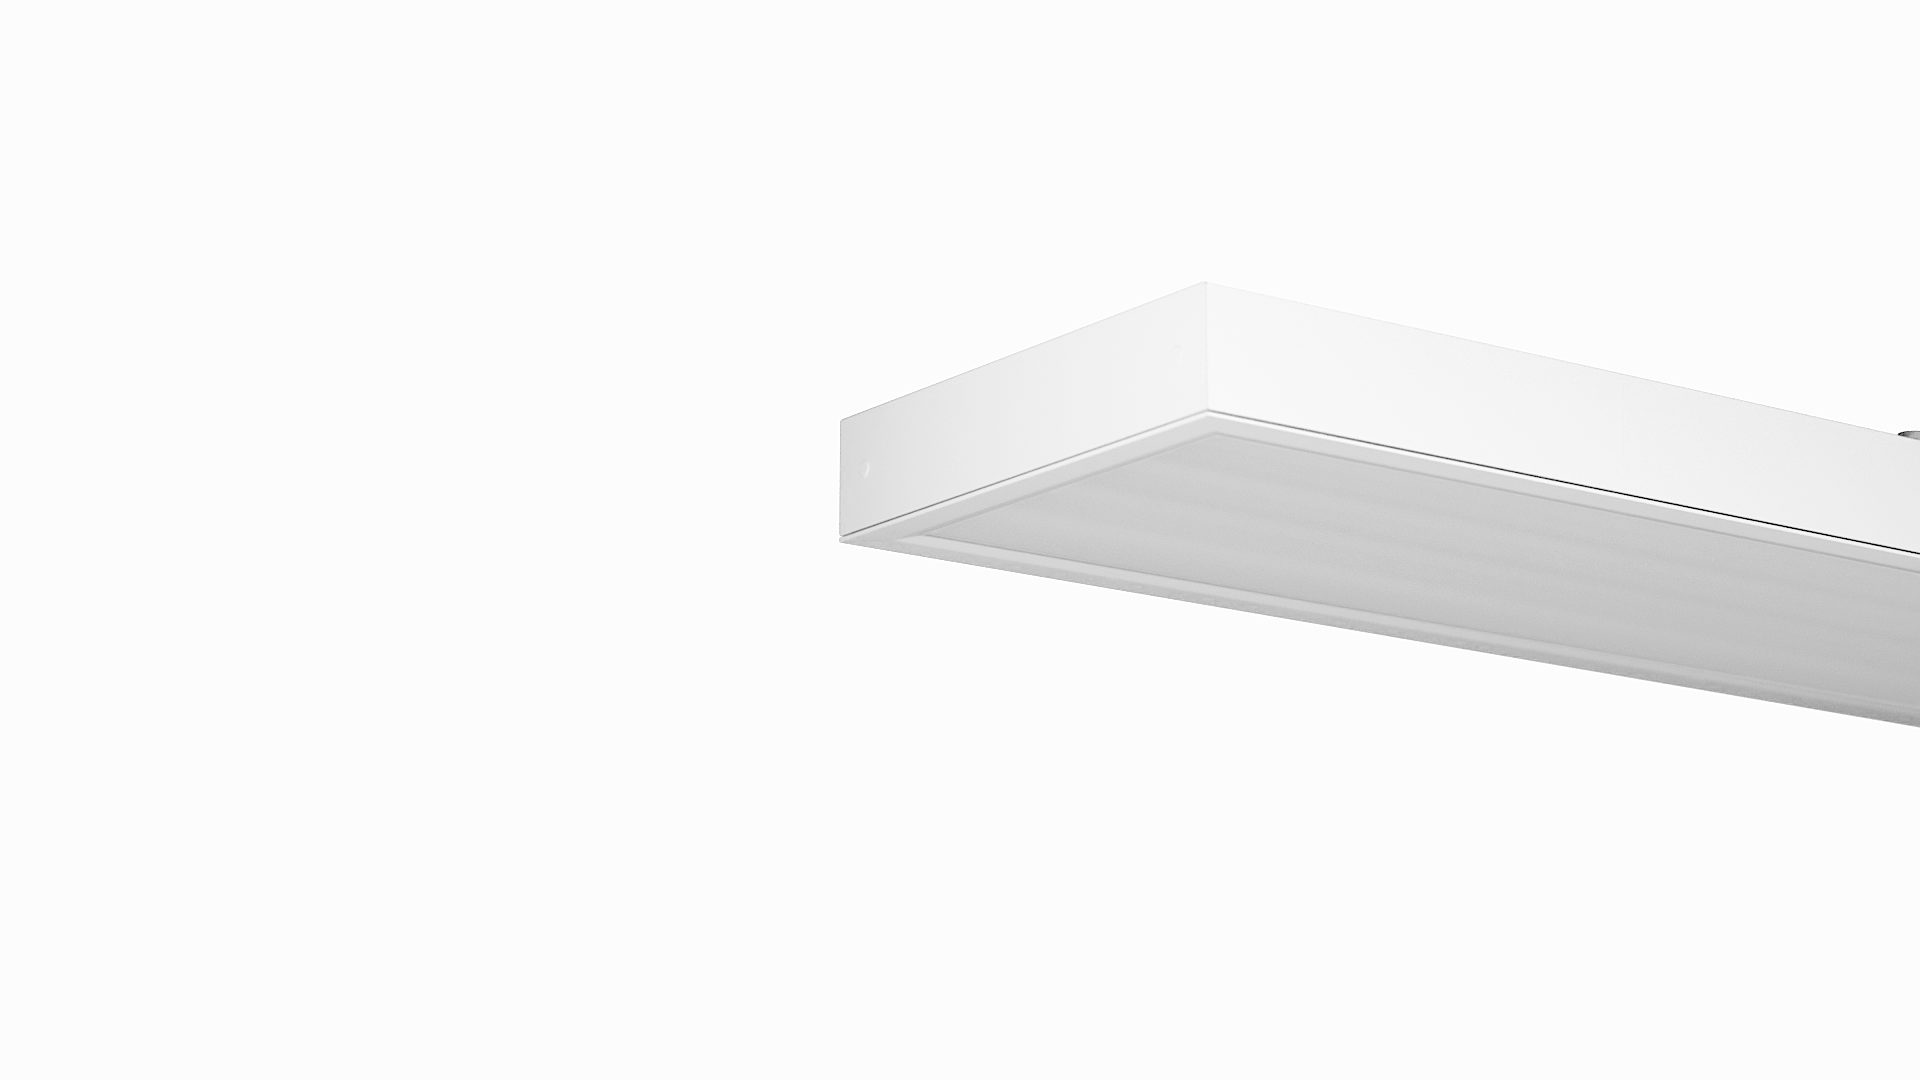 Trilux replacement diffuser Fidesca-BS 312 T 228 replacement vp - 5322800